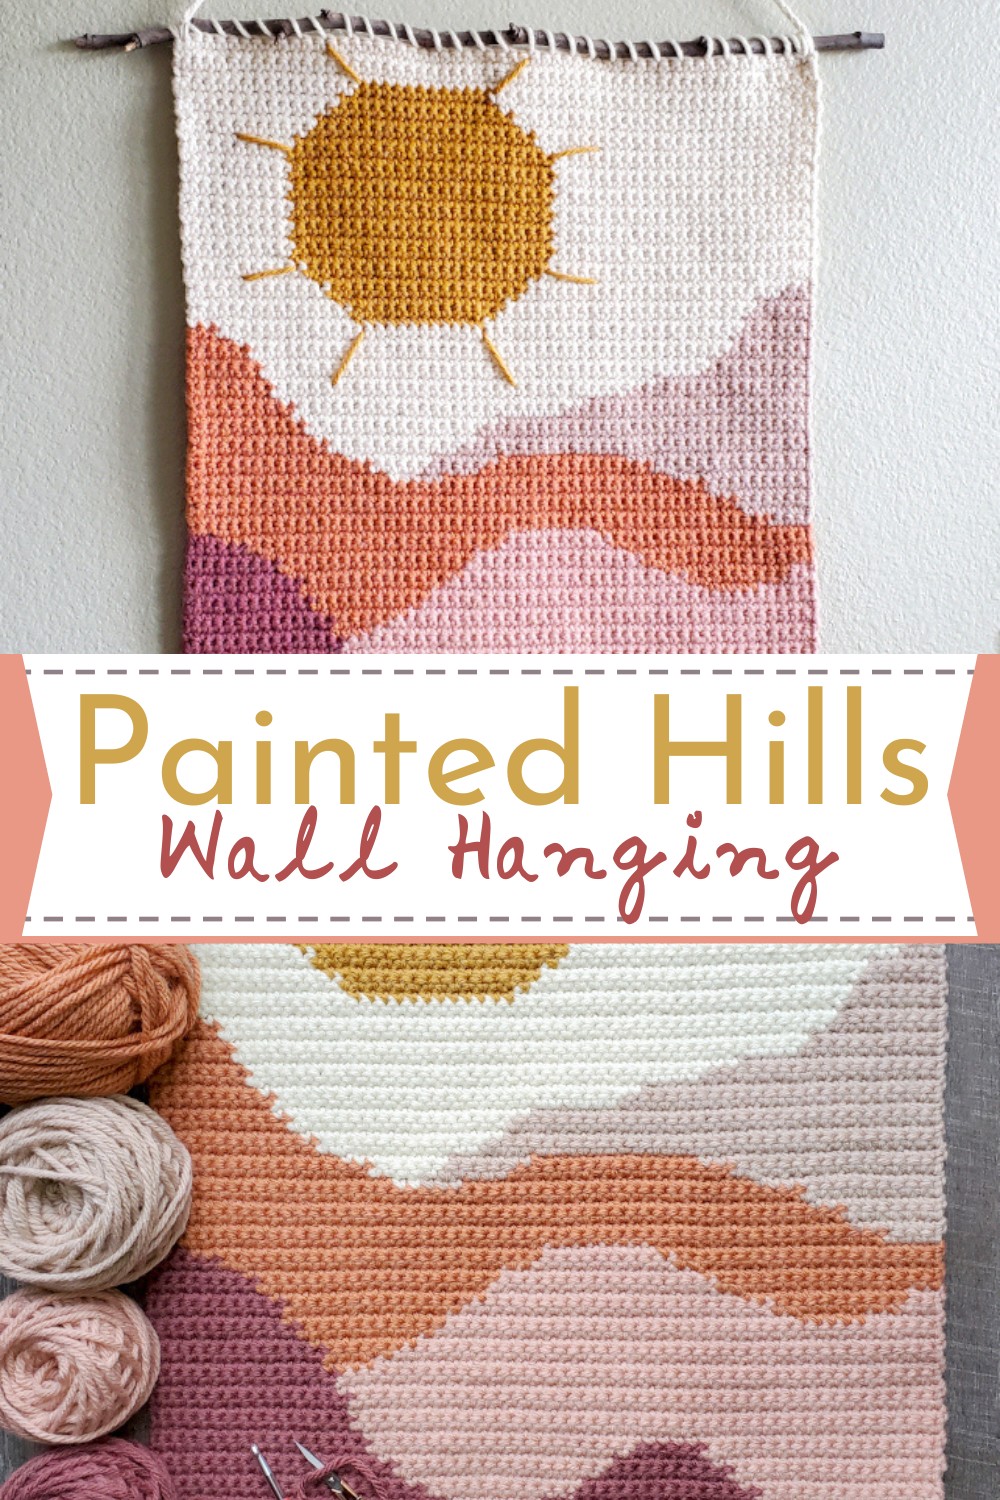 Painted Hills Wall Hanging